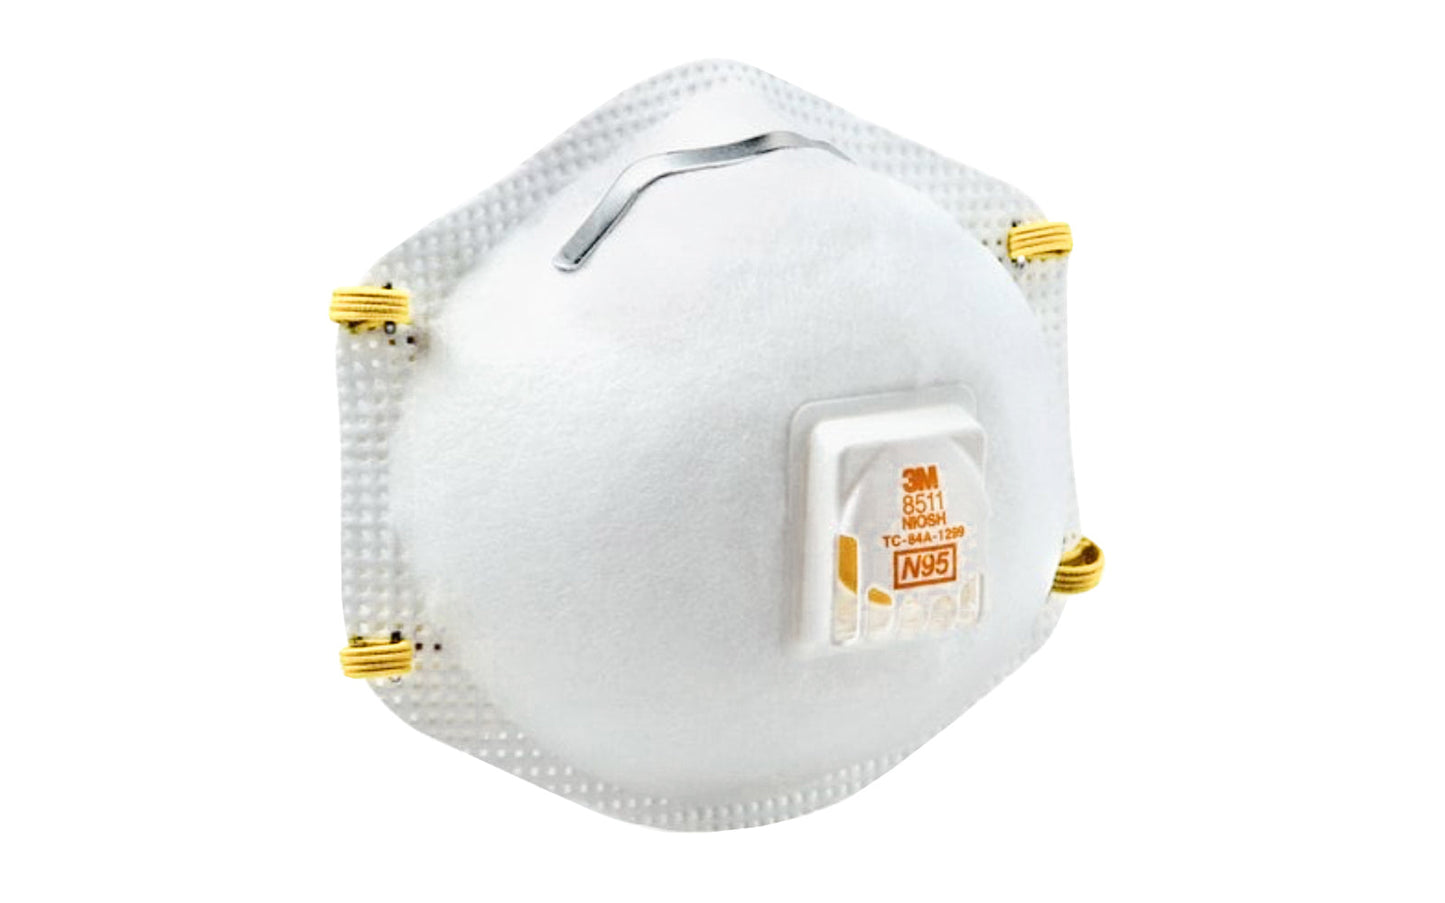 3M Model 8511 - 2 Pack. N95 Rating - NIOSH approved. Super comfortable soft material. Fully adjustable fit & adjustable nose piece ~ 95% filter efficiency against particulate aerosols free of oil. N95 Mask. Inside soft foam material padding for comfort. With Straps. 051131949331. Great for sanding, grinding, & cleaning